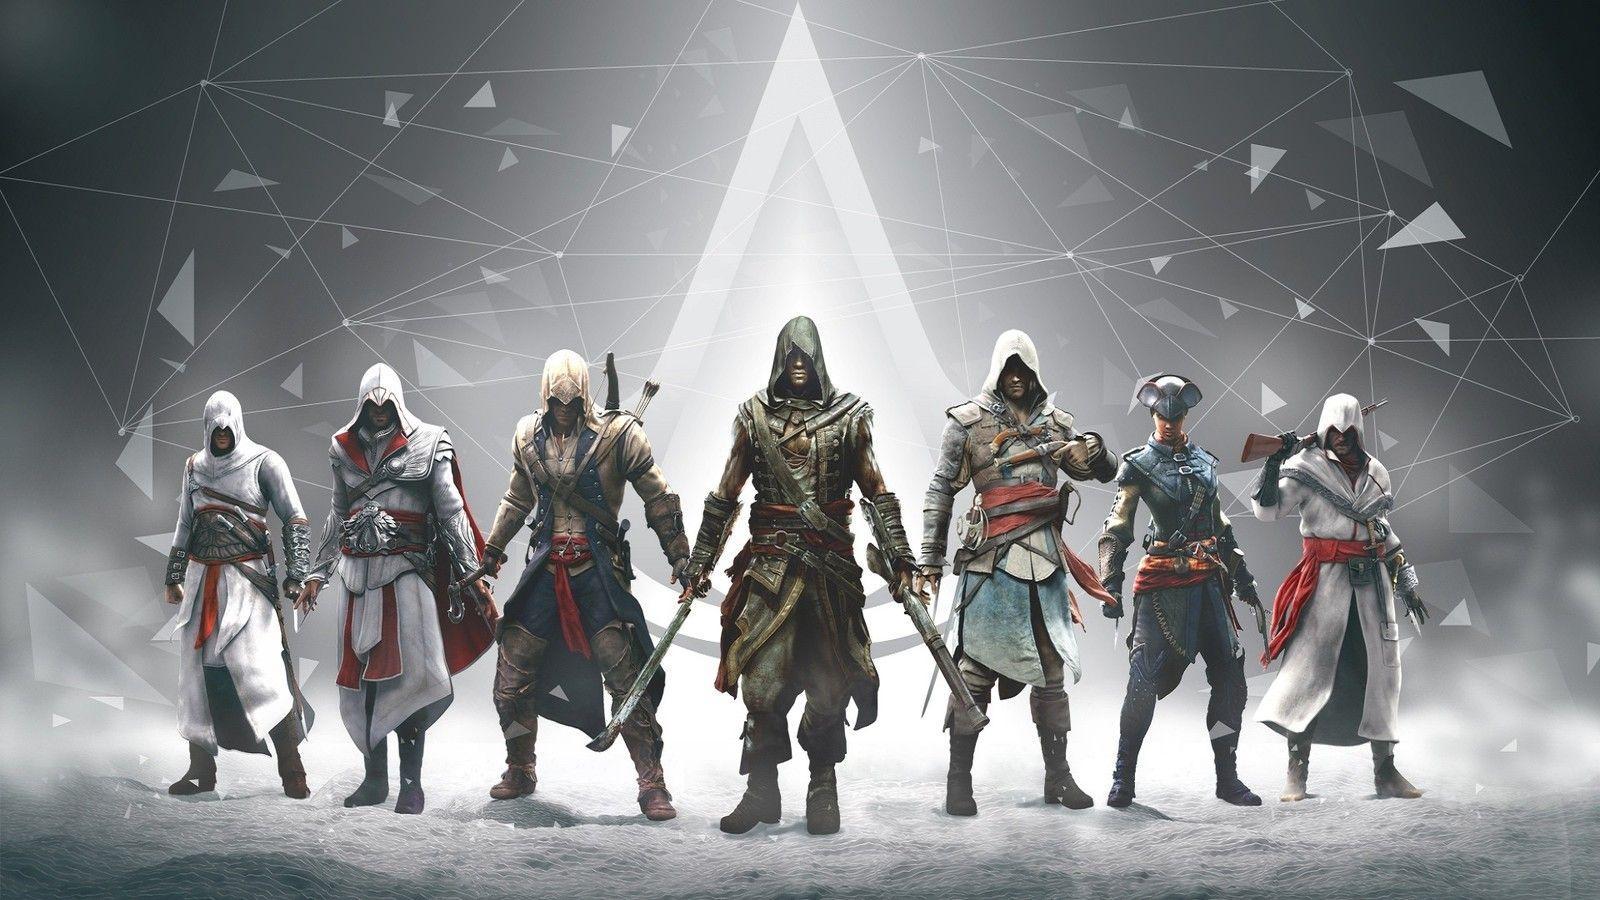 Rumored Assassin's Creed Game Titled Assassin's Creed Origins